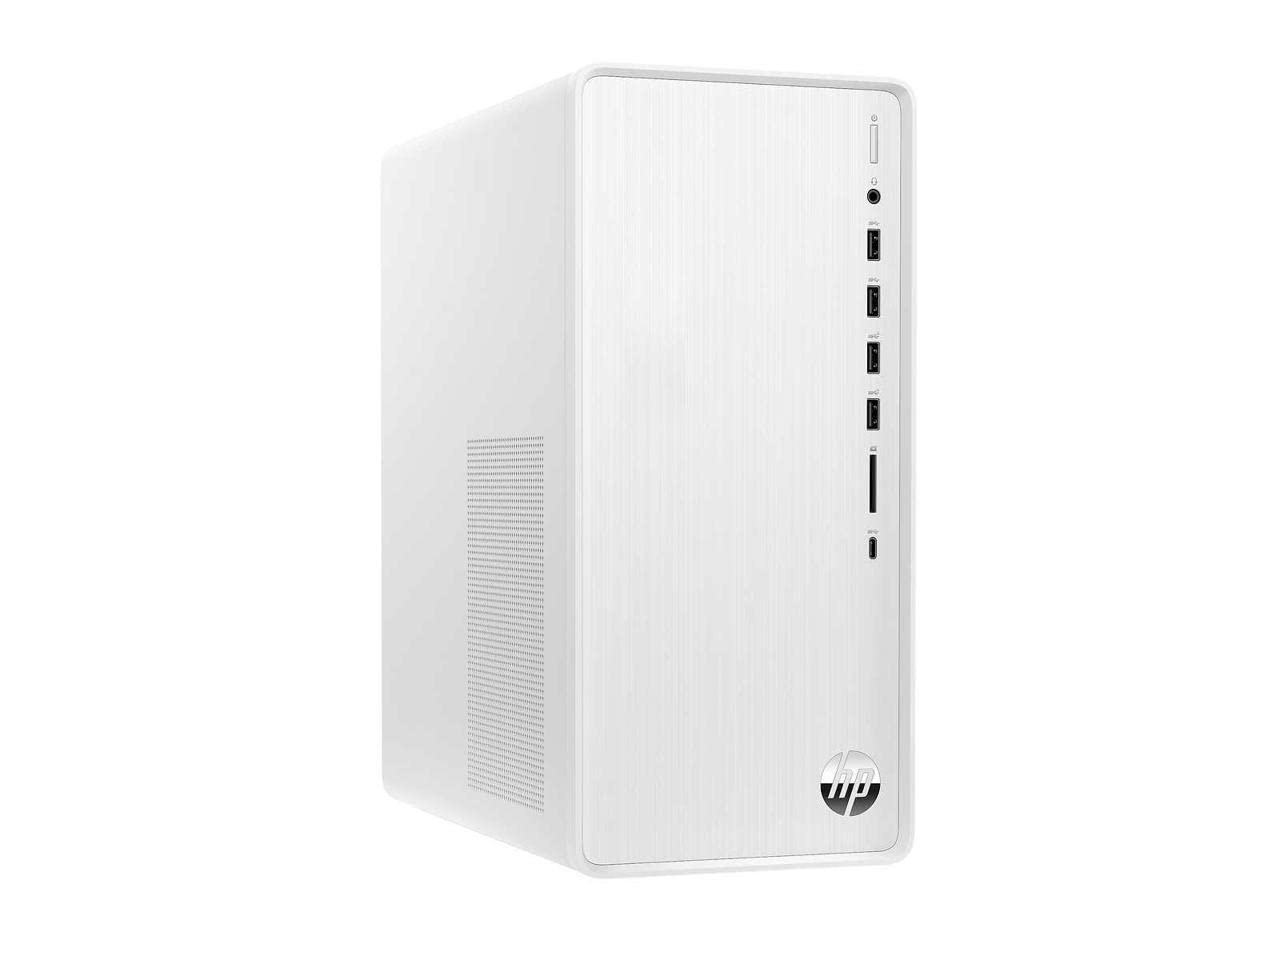 HP Pavilion TP01-3016 Home & Business Desktop, 12th Gen Intel® Core i5-12400, 32 GB DDR4 RAM, 1 TB SSD,Wi-Fi 6 + and Bluetooth® 5.2, Compact Tower Design, No Optical Drive, Windows 10 Professional